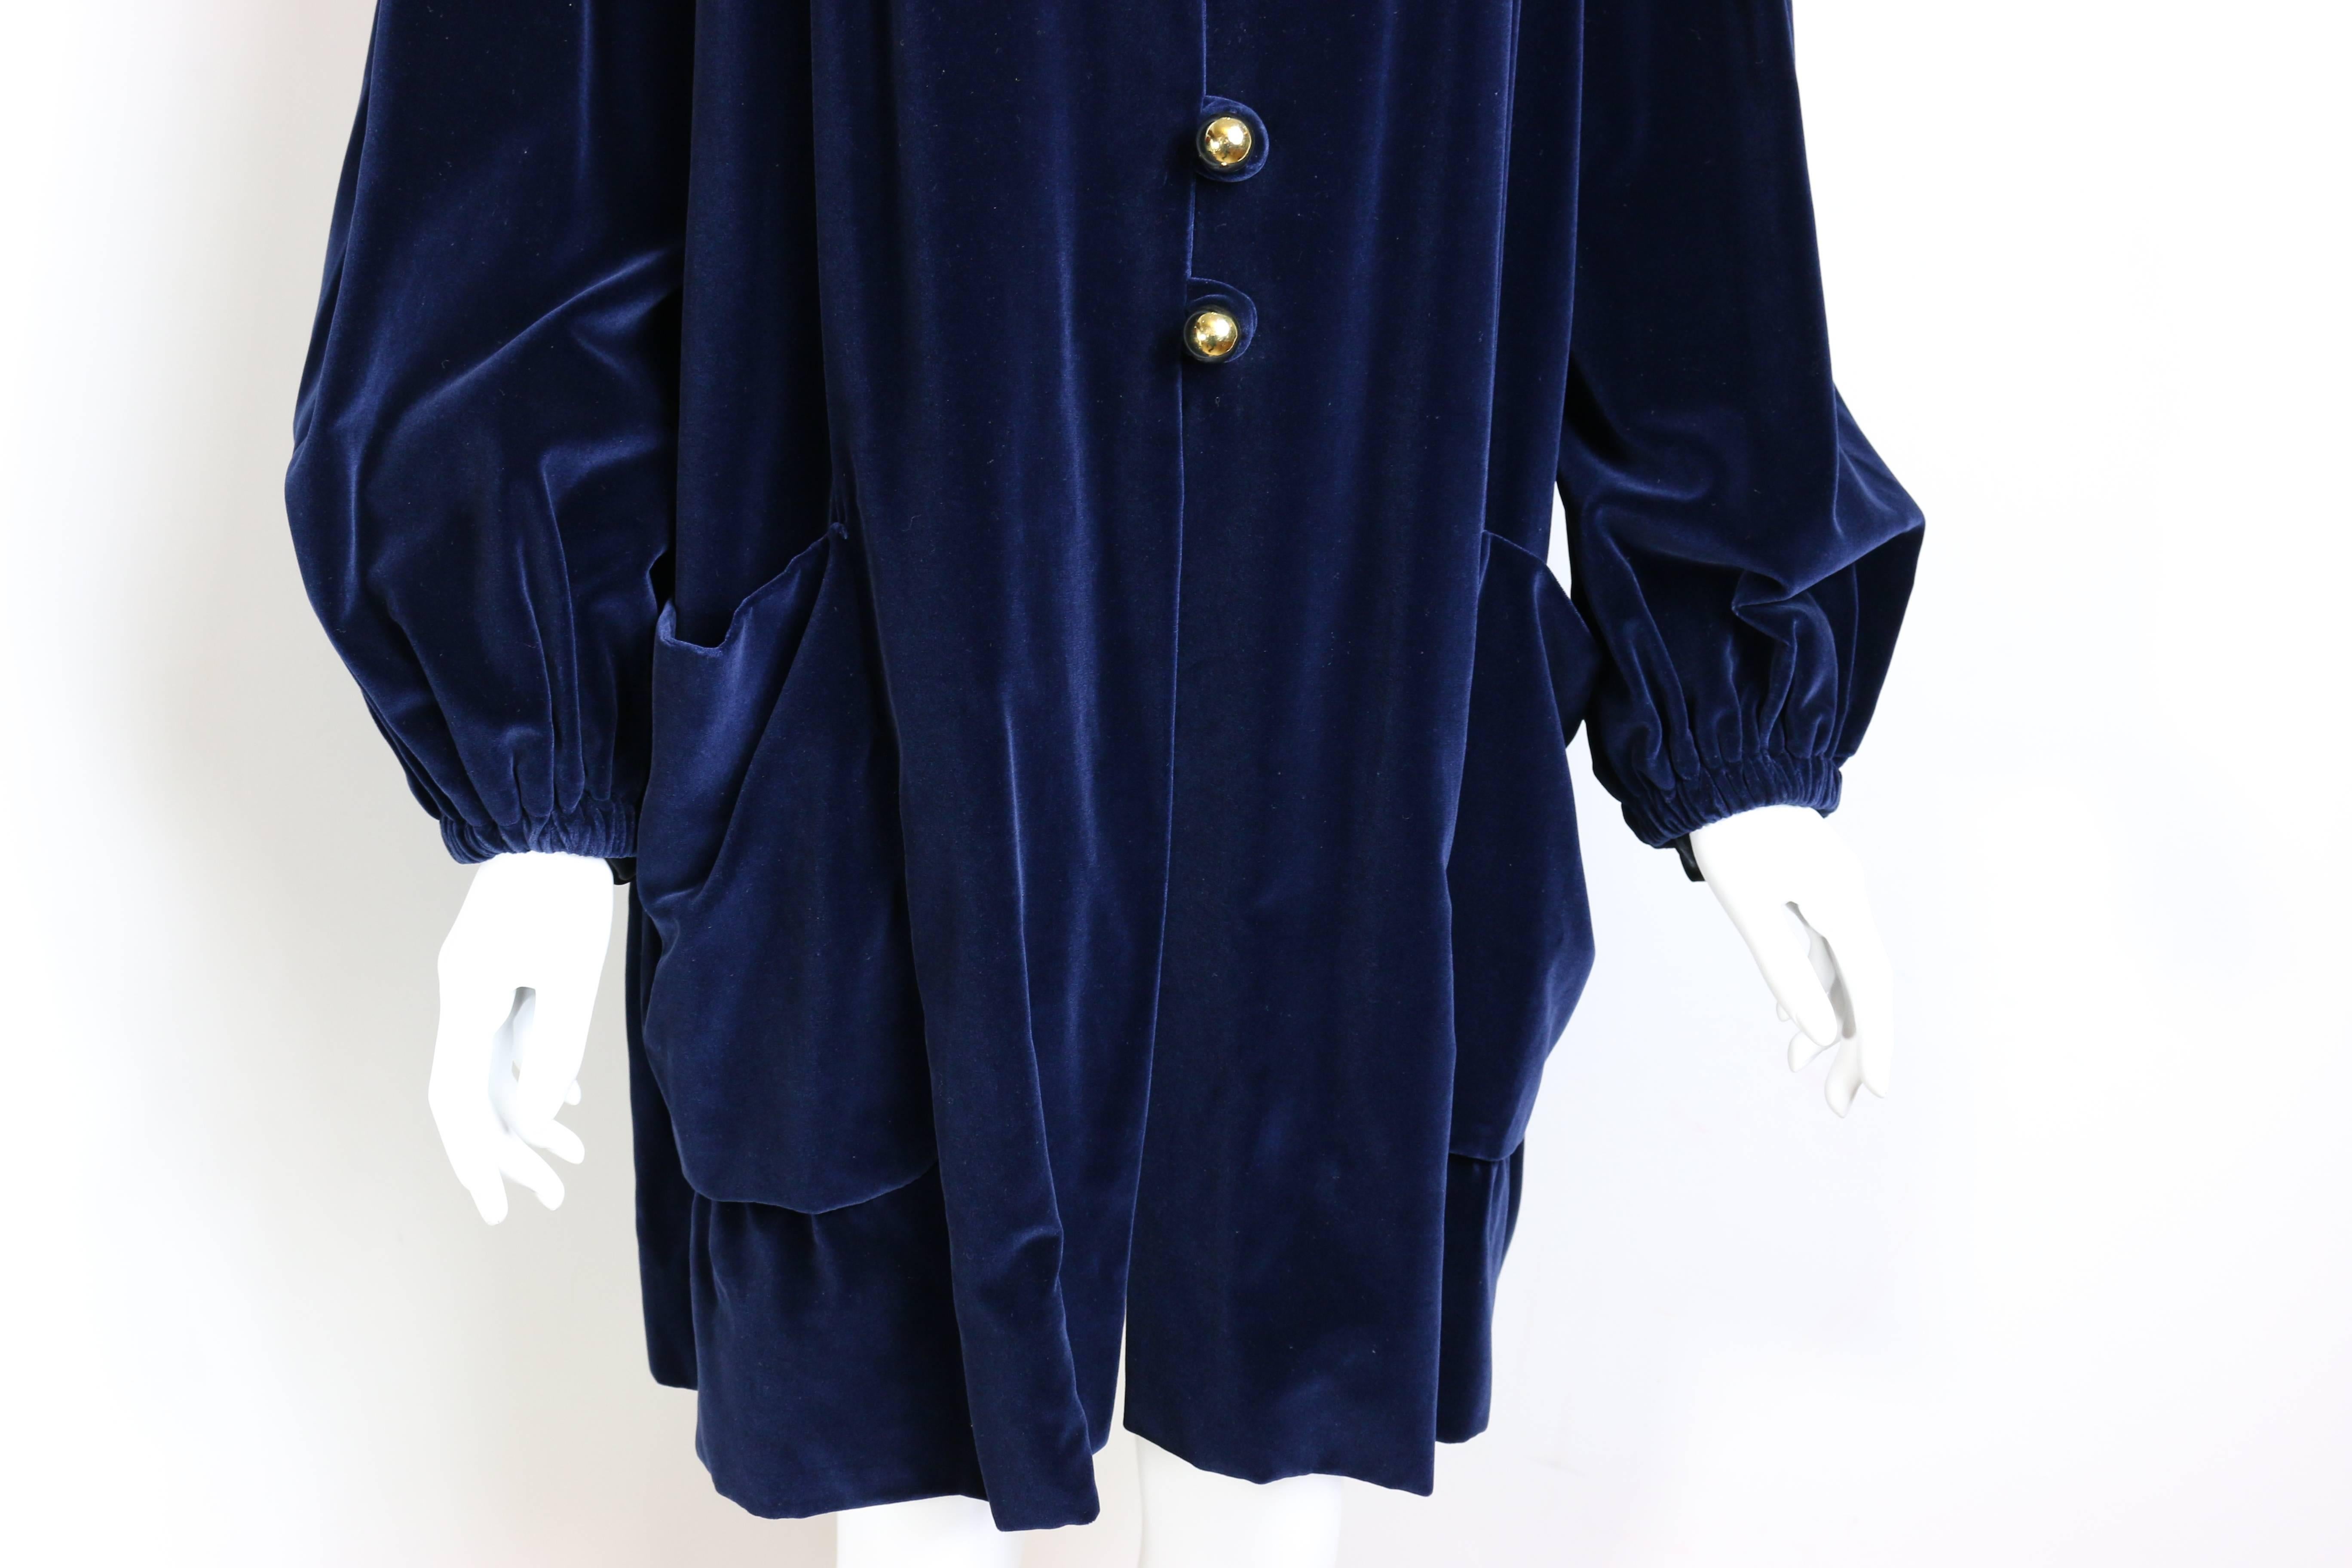 - Moschino Couture blue velvet jacket featuring eight gold buttons on front and two front pockets. 

-  Elastic Cuffs. 

- It fits a bit oversized. 

- Size 42 Italy. 

- 81% Cotton, 19% Silk I Lining : 100 %Rayon. 

- Shoulder: 16cm I